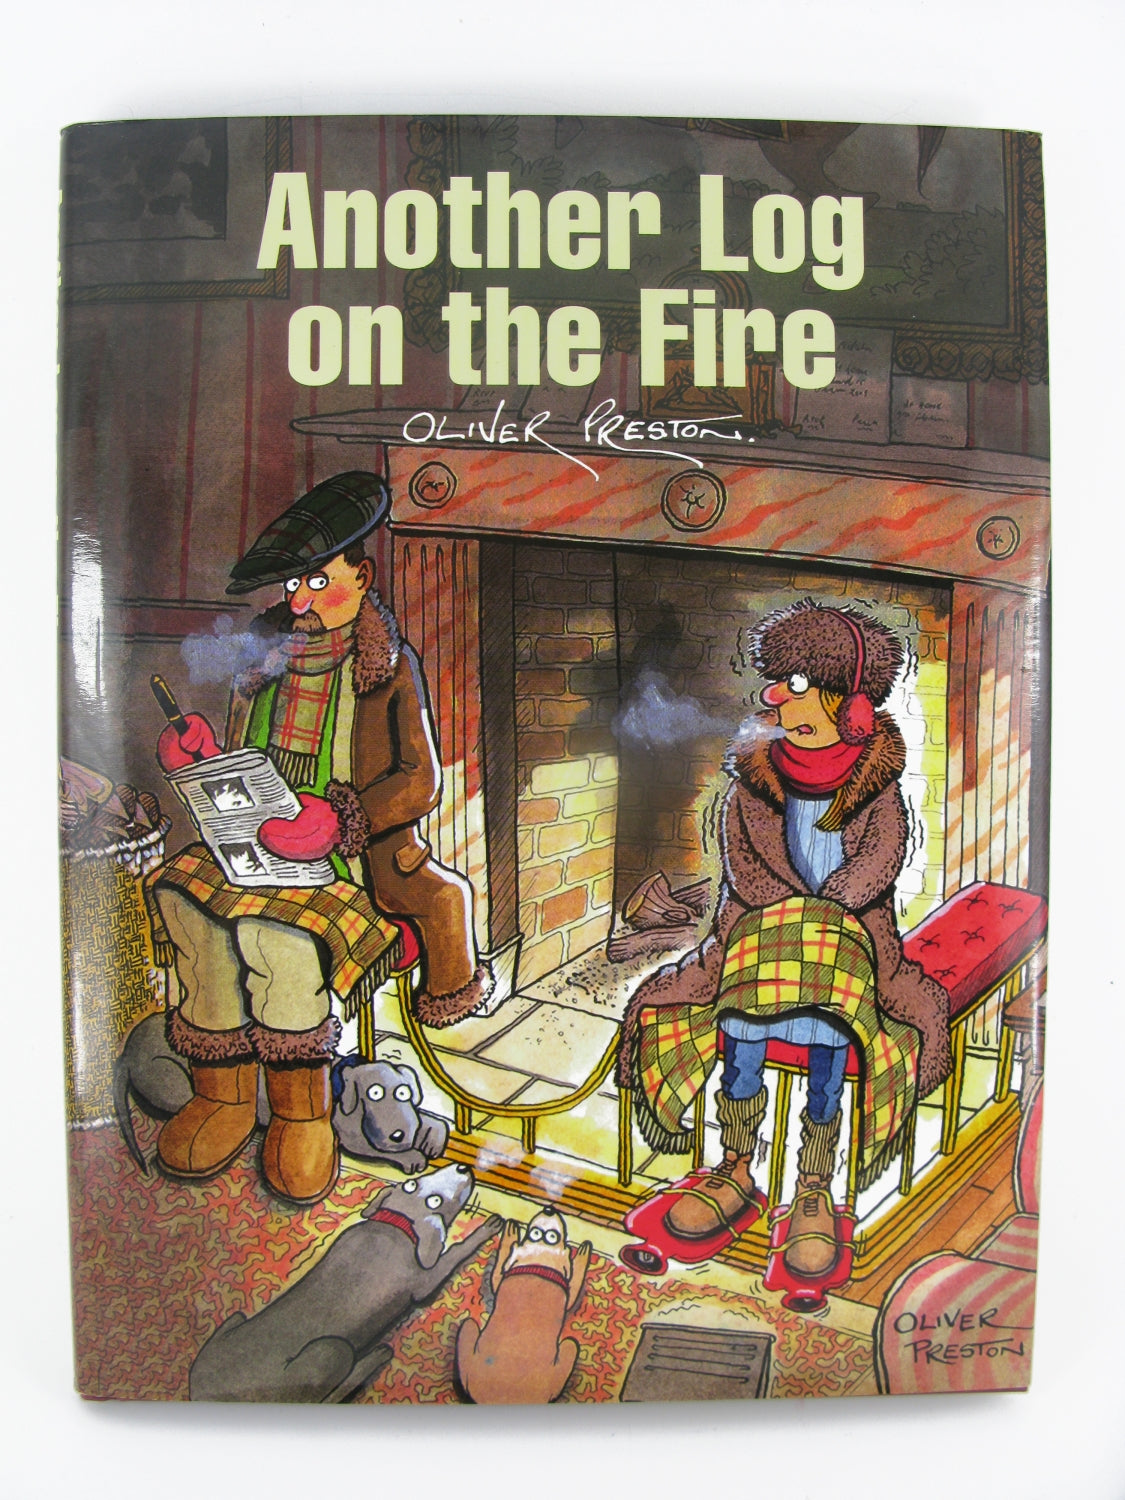 Another Log On The Fire by Oliver Preston